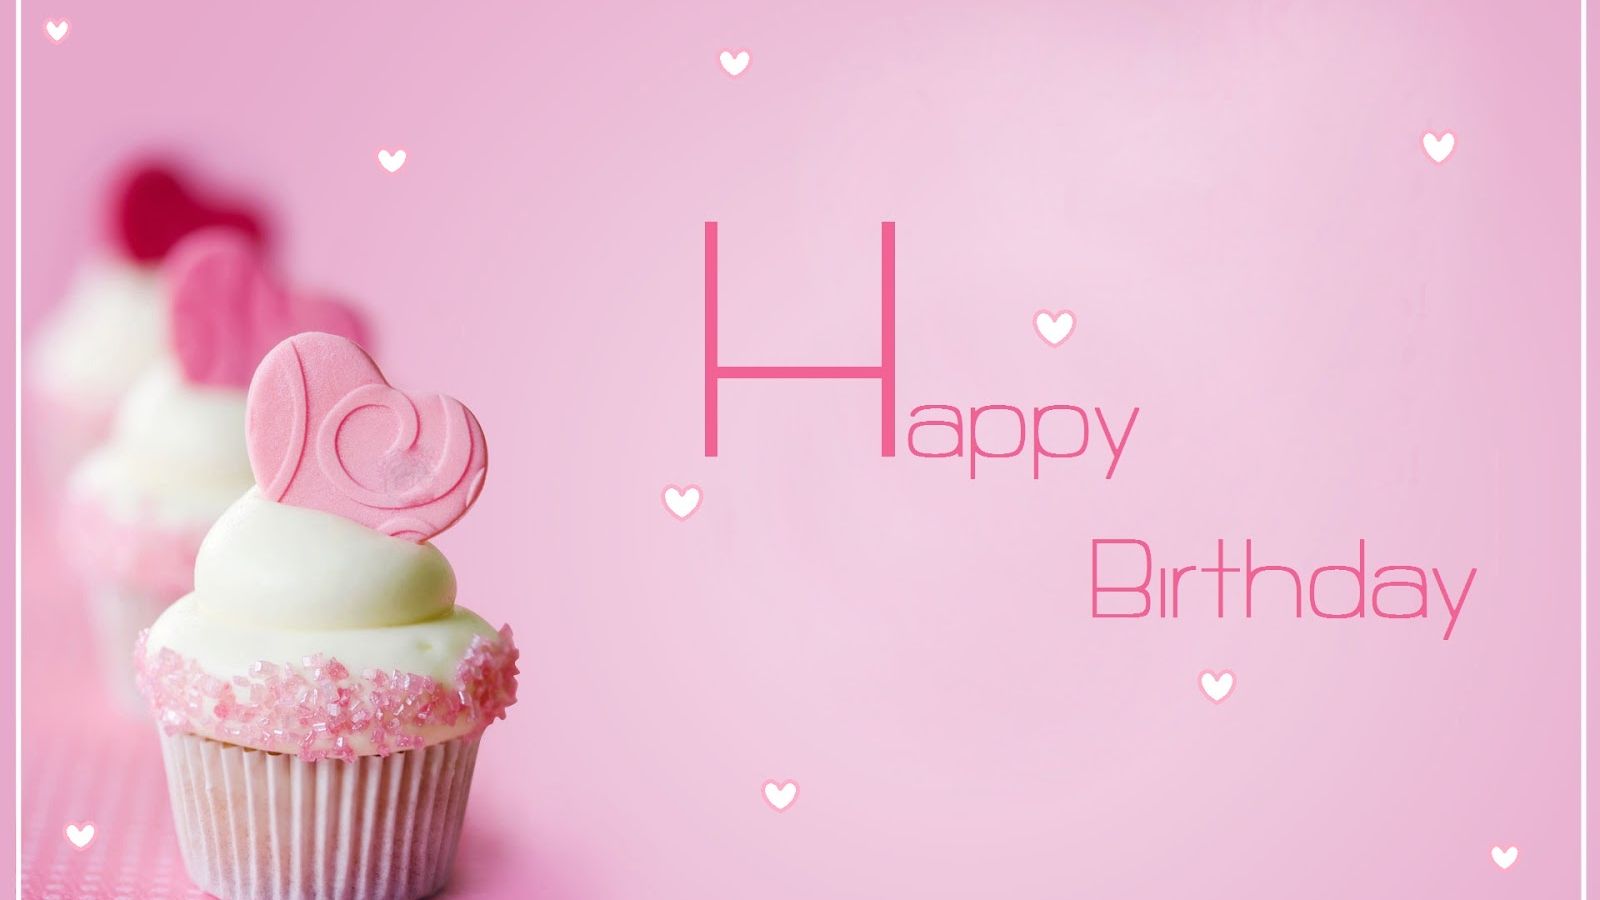 Free download Happy birthday pink background with little hearts for girls imagejpg [1600x1000] for your Desktop, Mobile & Tablet. Explore Happy Birthday Cupcake Wallpaper. Happy Birthday Cupcake Wallpaper, Birthday